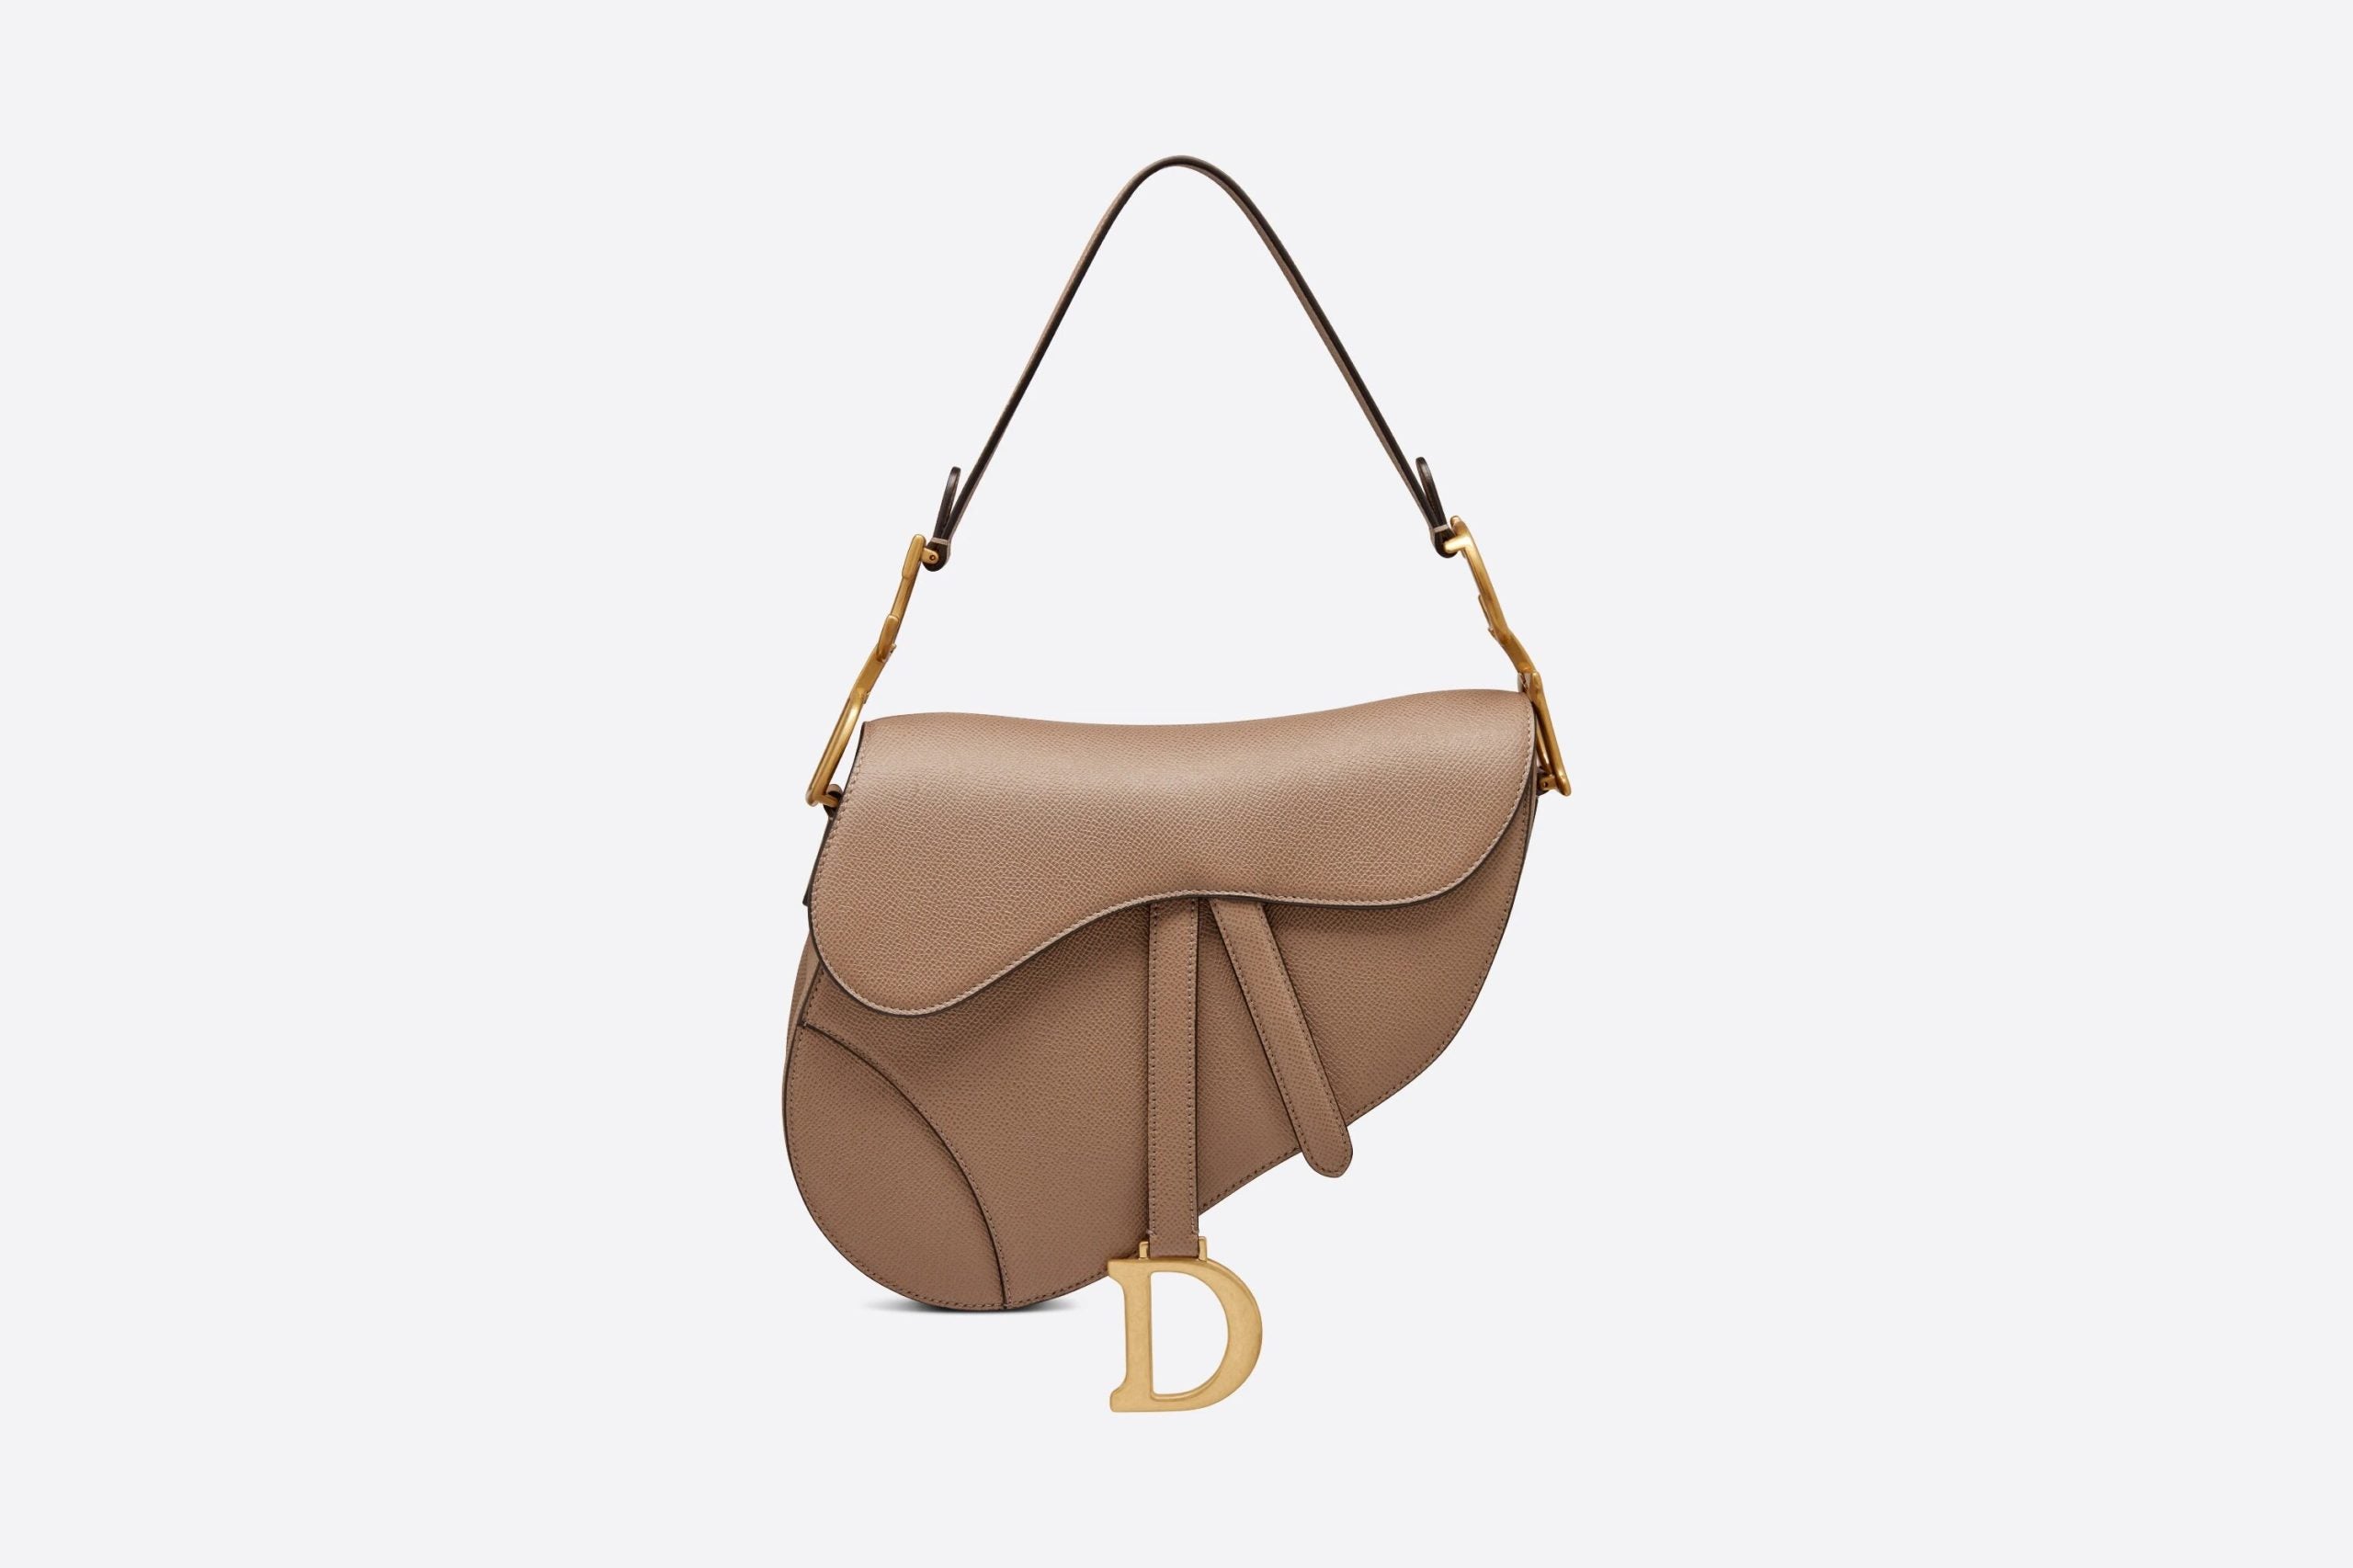 Classic Handbags That Will Never Go Out Of Style